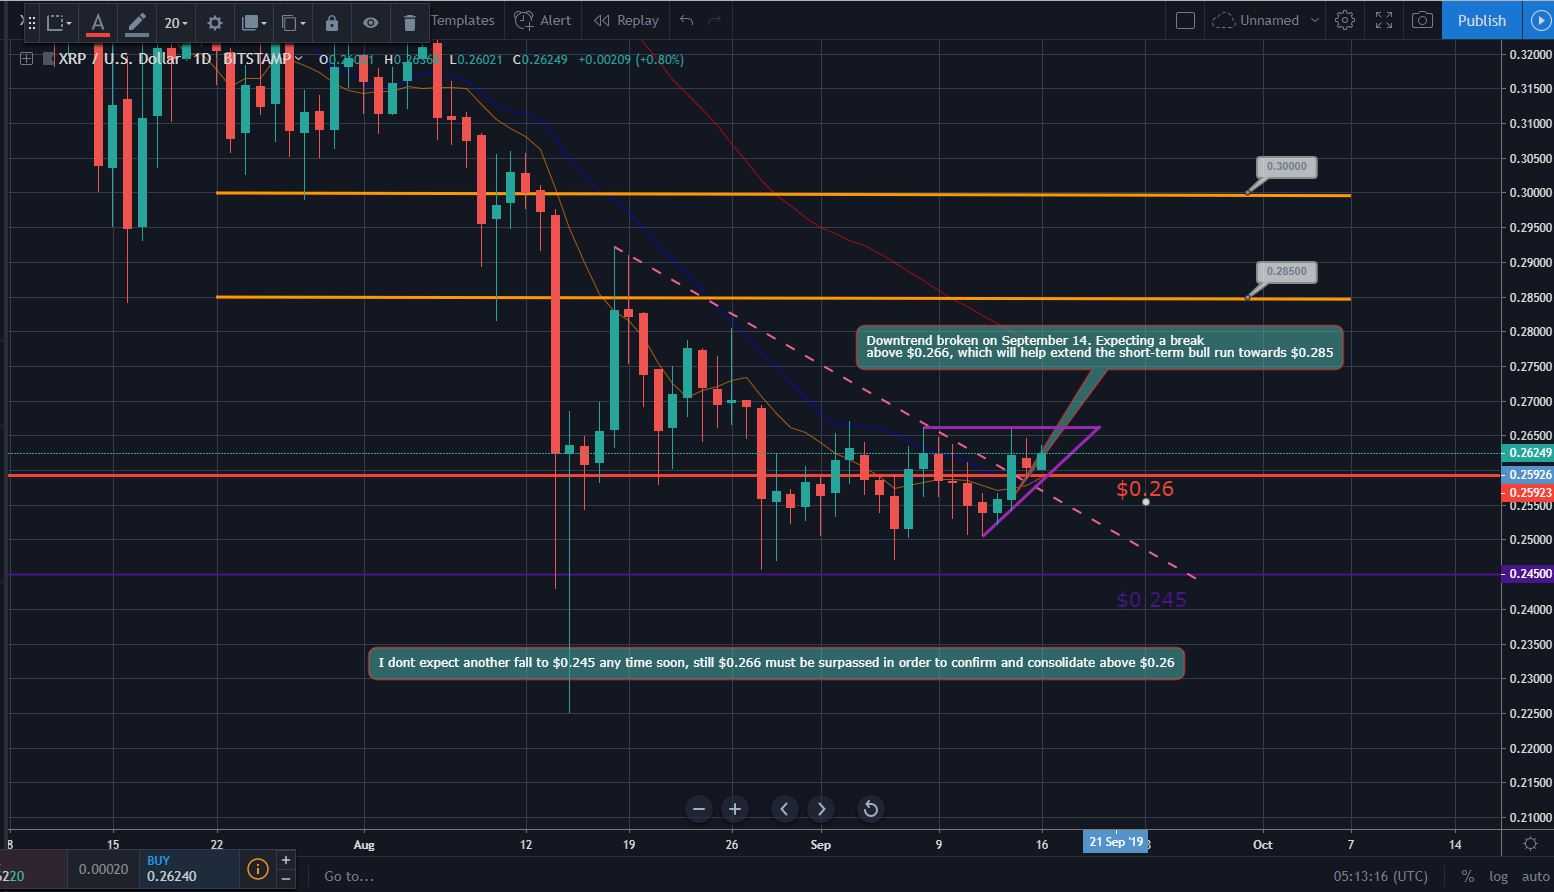 Bitcoin, Ether, and XRP Weekly Market Update September 16, 2019 - 3